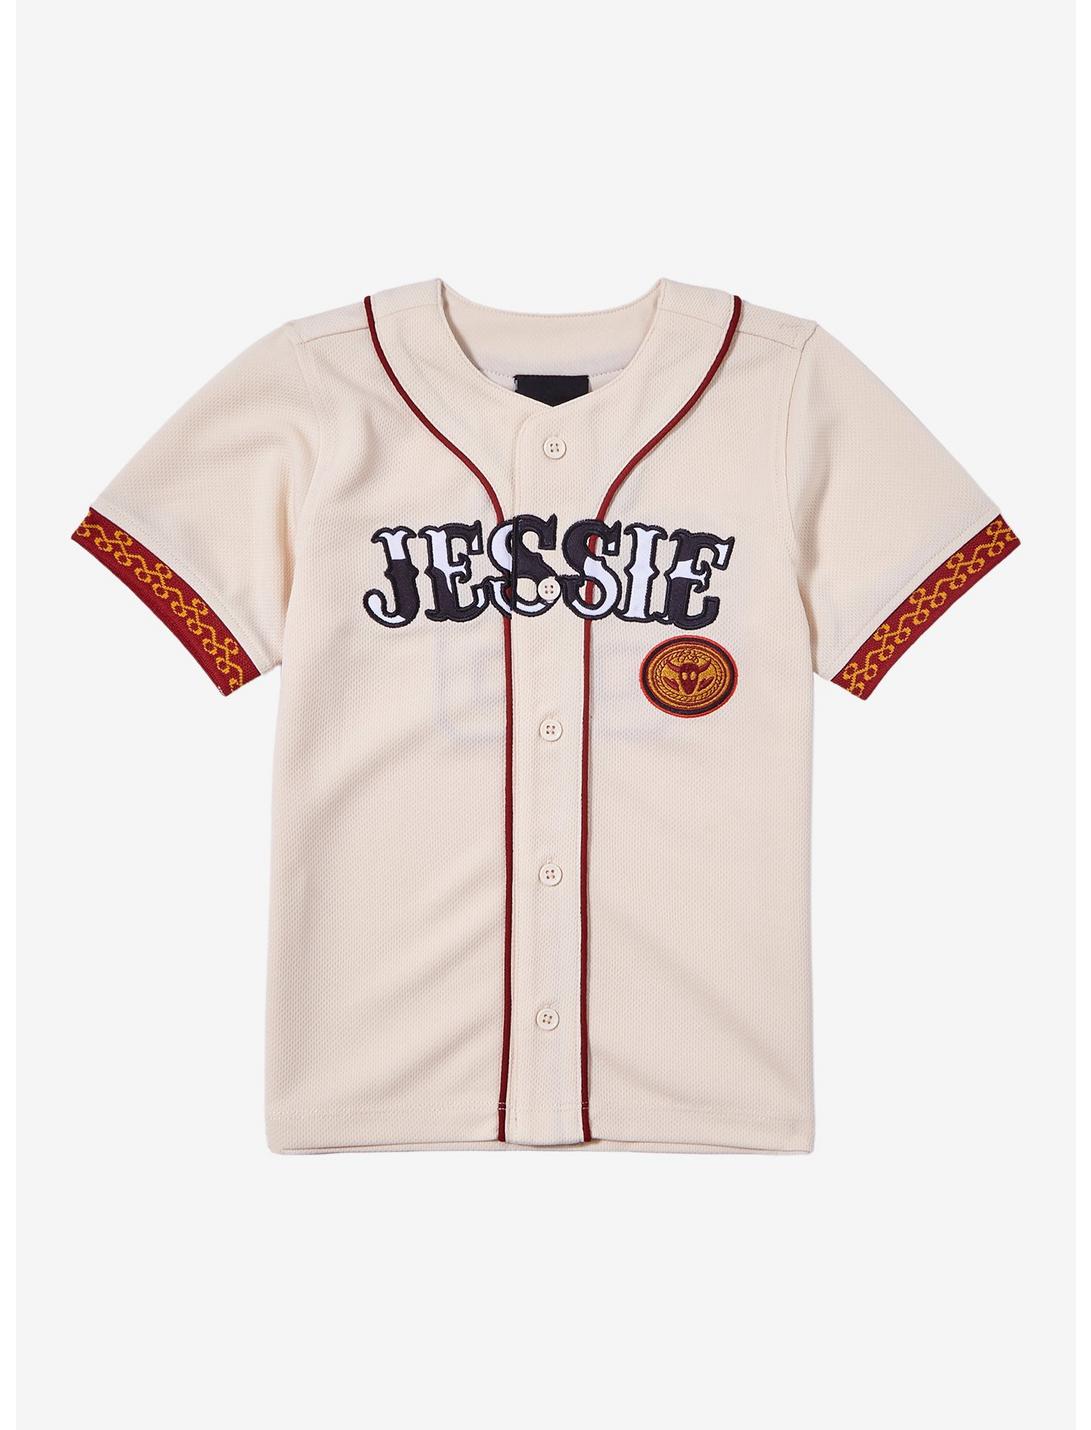 Disney Pixar Toy Story Jessie Toddler Baseball Jersey — BoxLunch Exclusive, NATURAL, hi-res